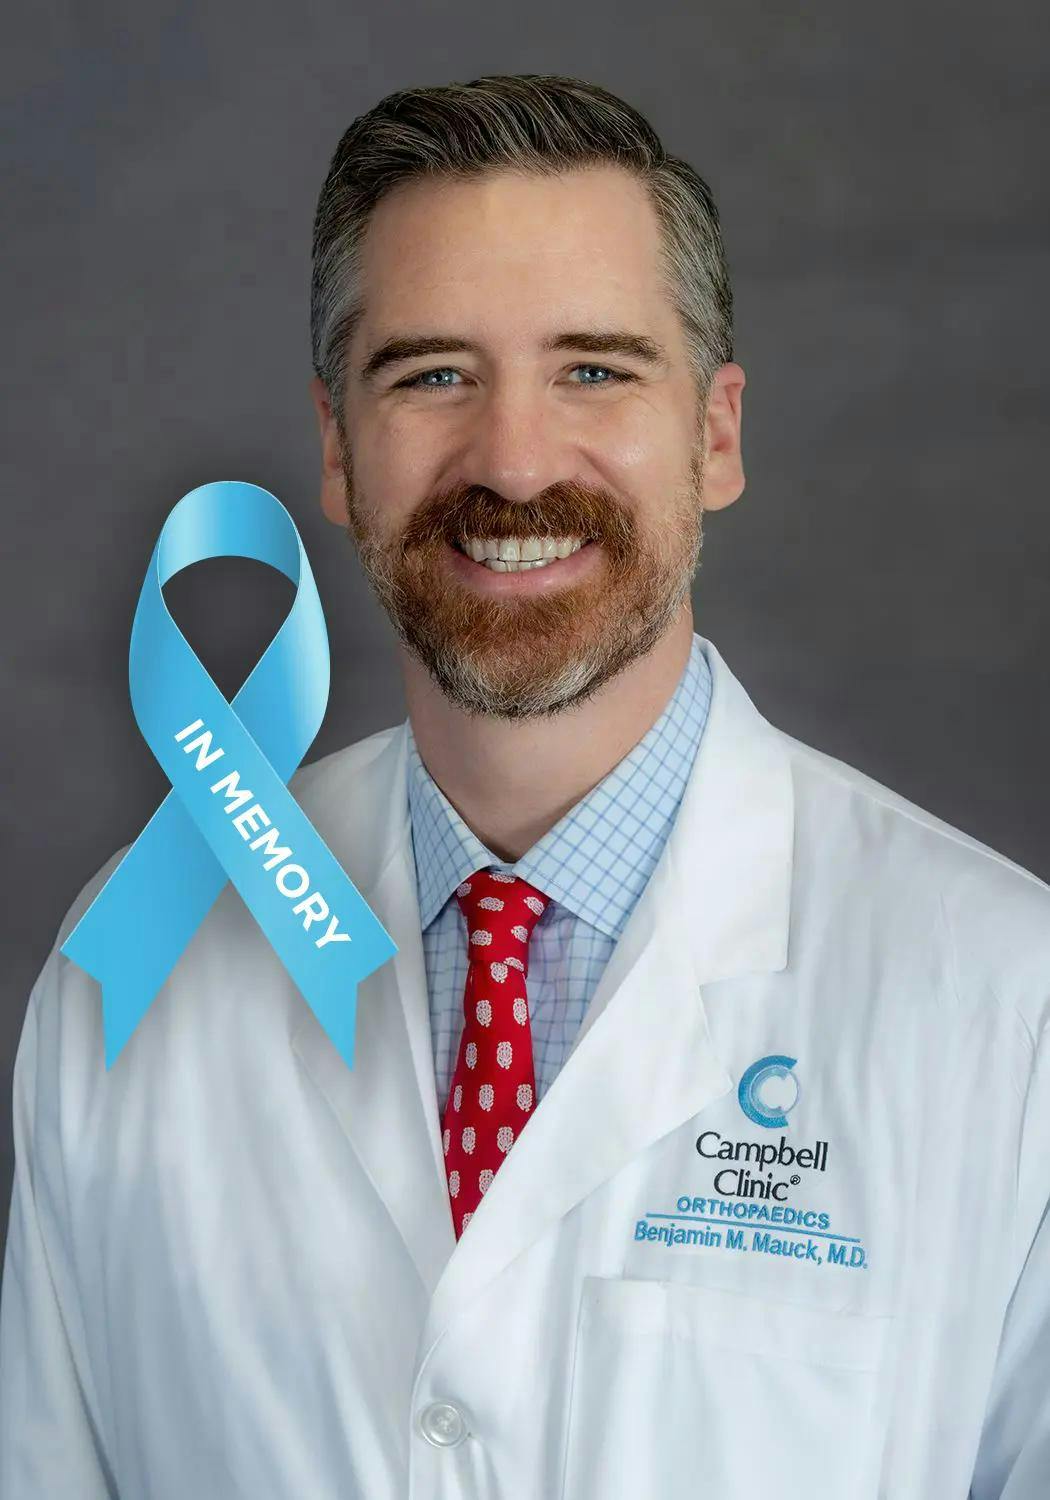 Dr. Ben Mauck was fatally shot in an exam room at the Campbell Clinic outside Memphis, authorities said. (Photo: Campbell Clinic)